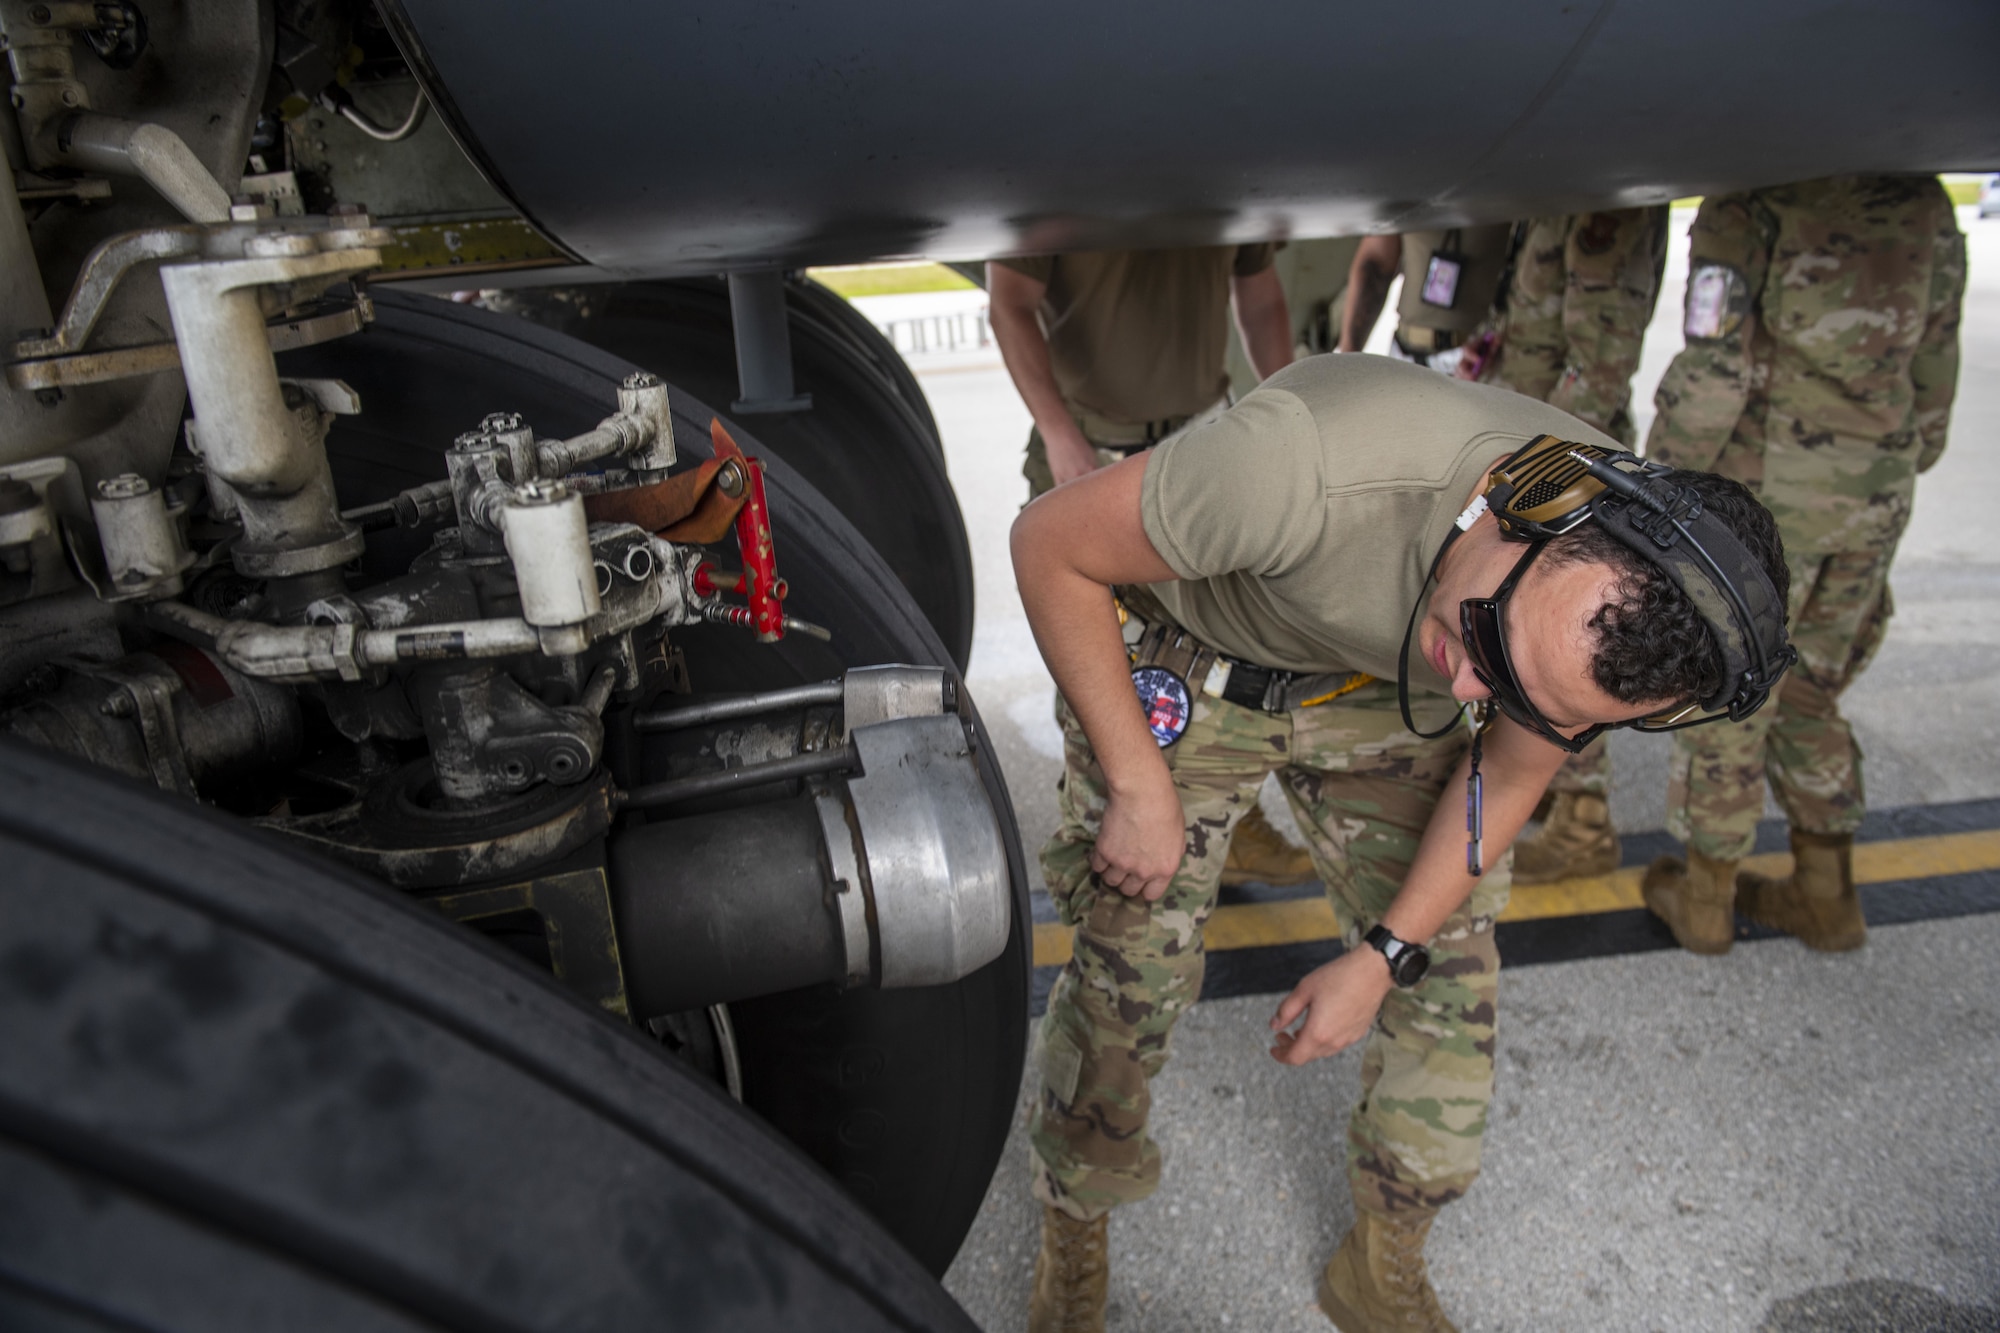 U.S. Air Force Staff Sgt. Noel Lealalegria, 96th Expeditionary Bomb Squadron crew chief, inspects the landing gear of a B-52 Stratofortress during a Bomber Task Force mission at Andersen Air Force Base, Guam, Feb. 11, 2022. Bomber Task Force missions enable crews to maintain a high state of readiness and proficiency, and validate our always-ready global strike capability. (U.S. Air Force photo by Staff Sgt. Lawrence Sena)